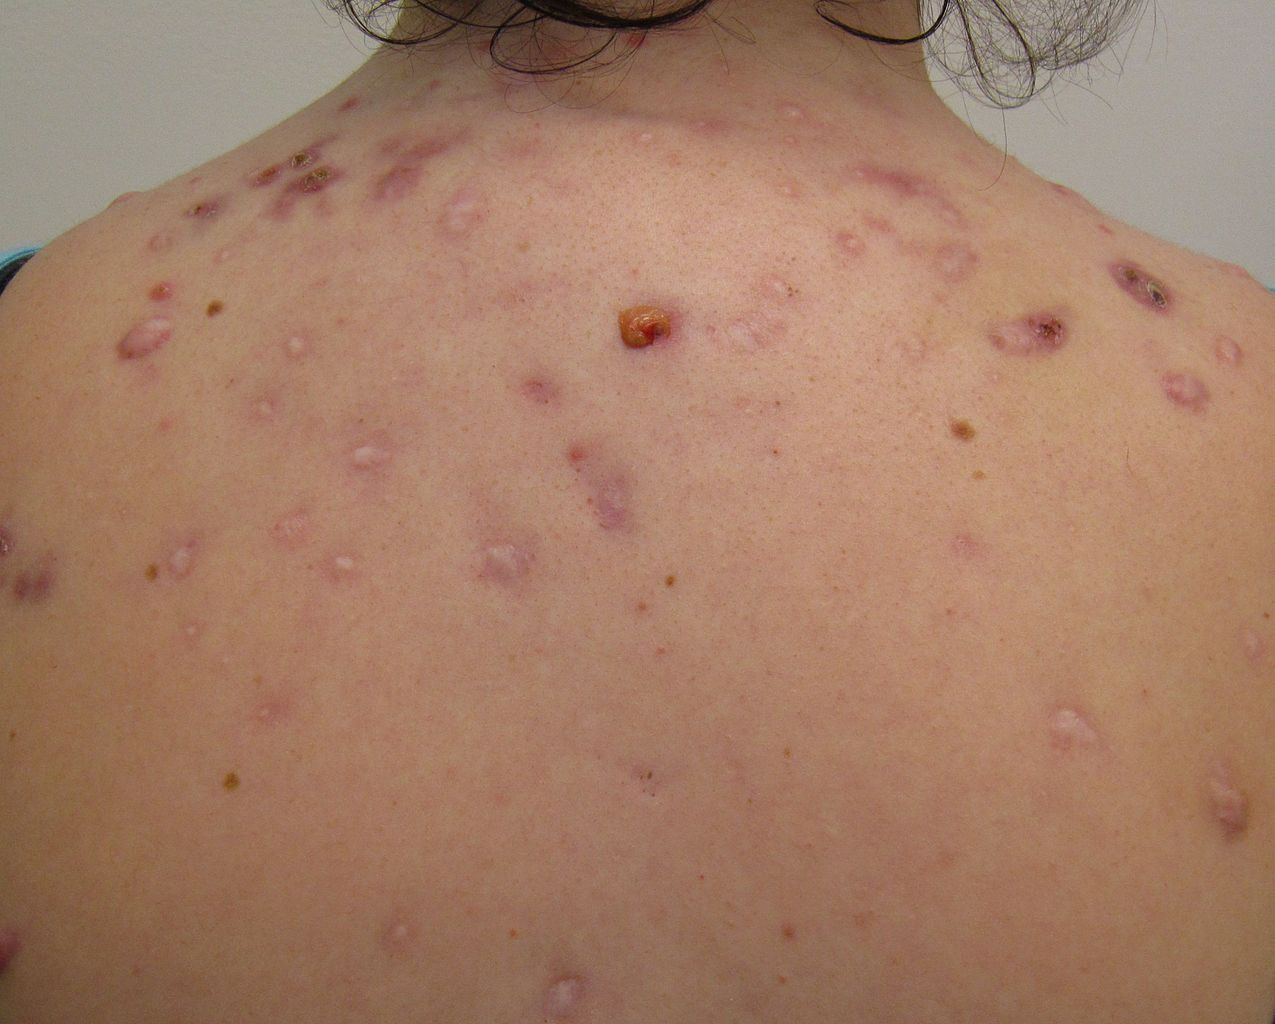 A woman with acne on her back